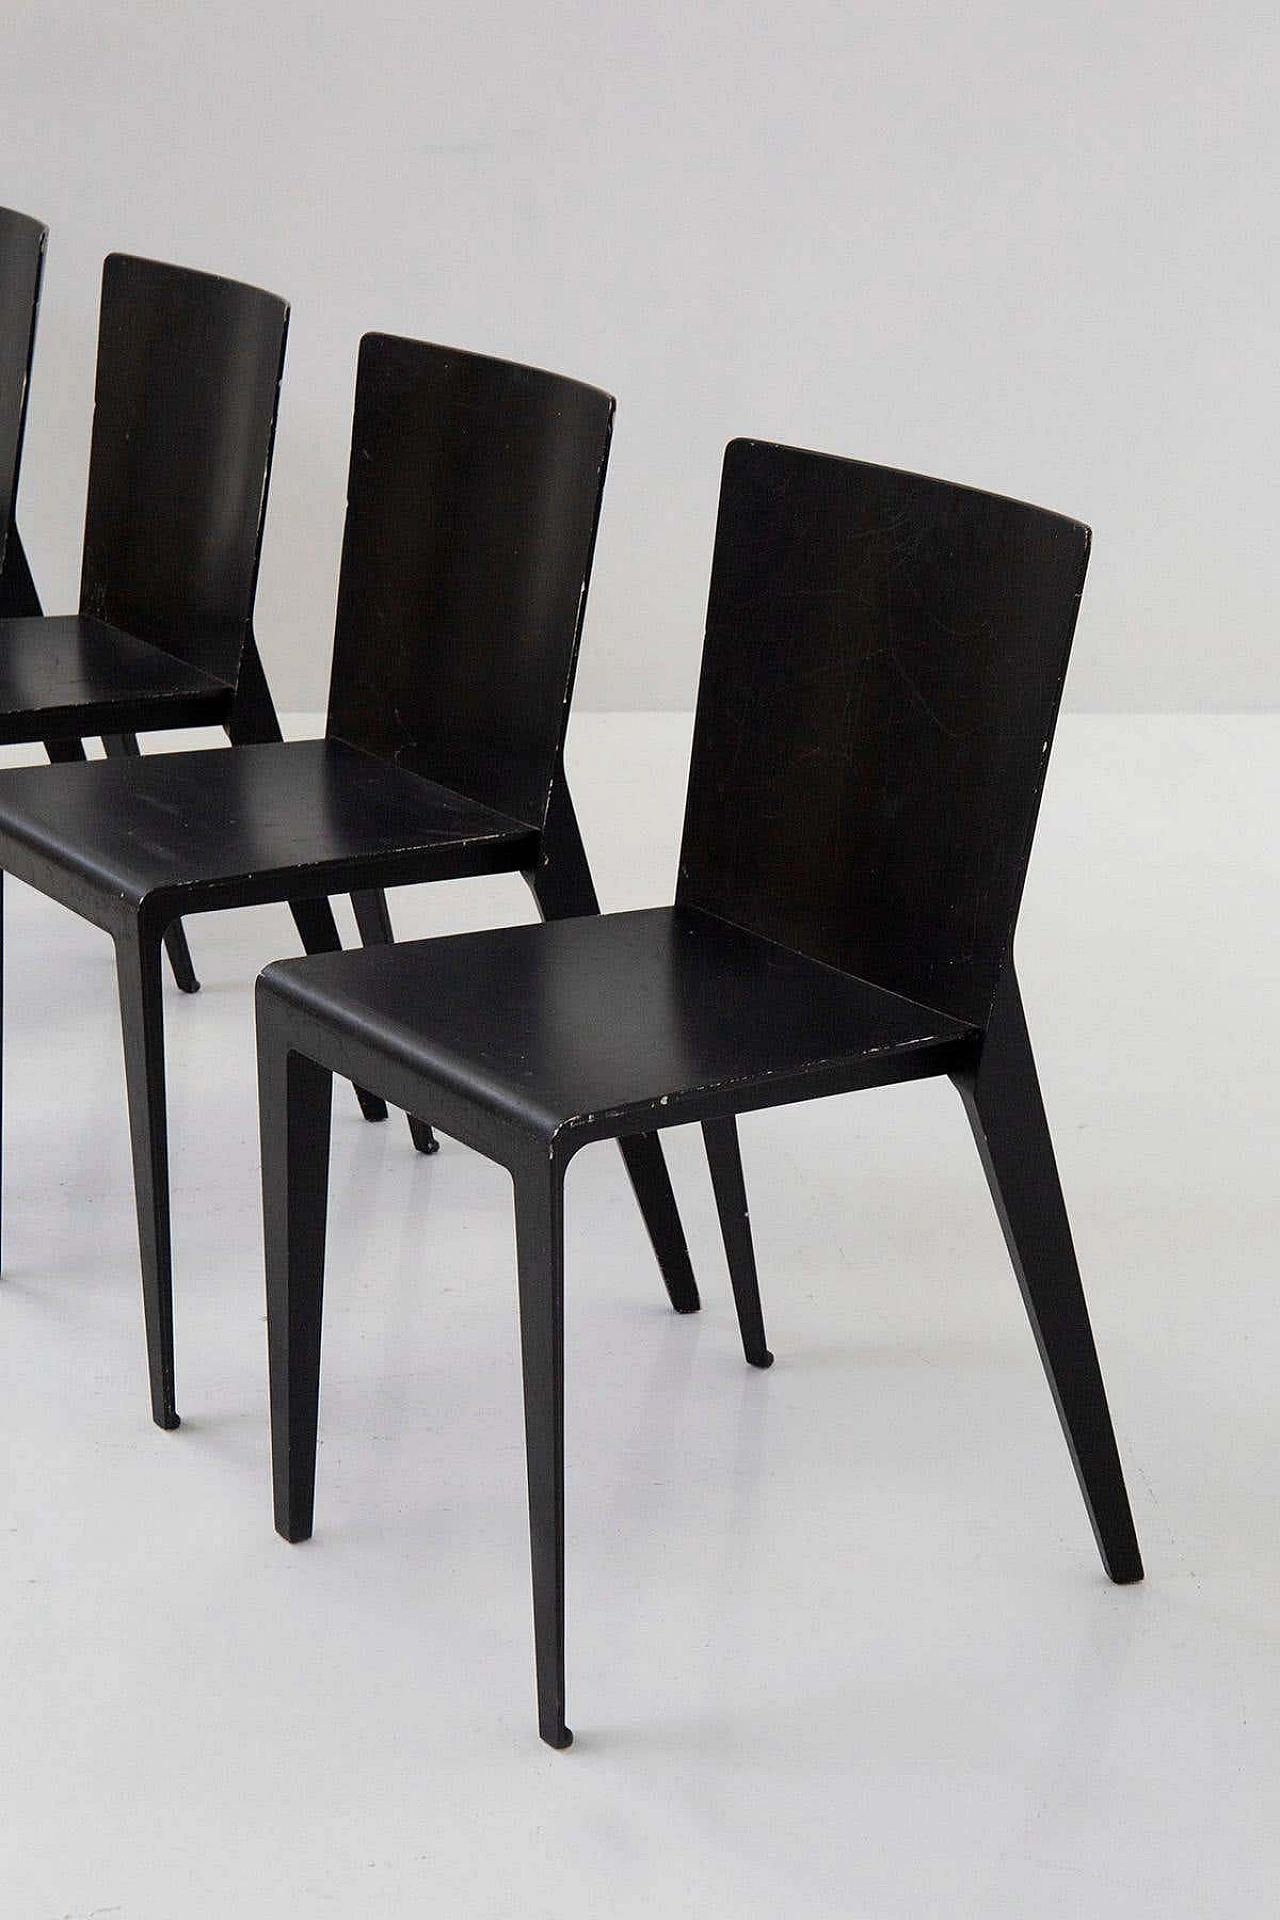 5 Alfa chairs by Hannes Wettstein for Molteni, 2001 4